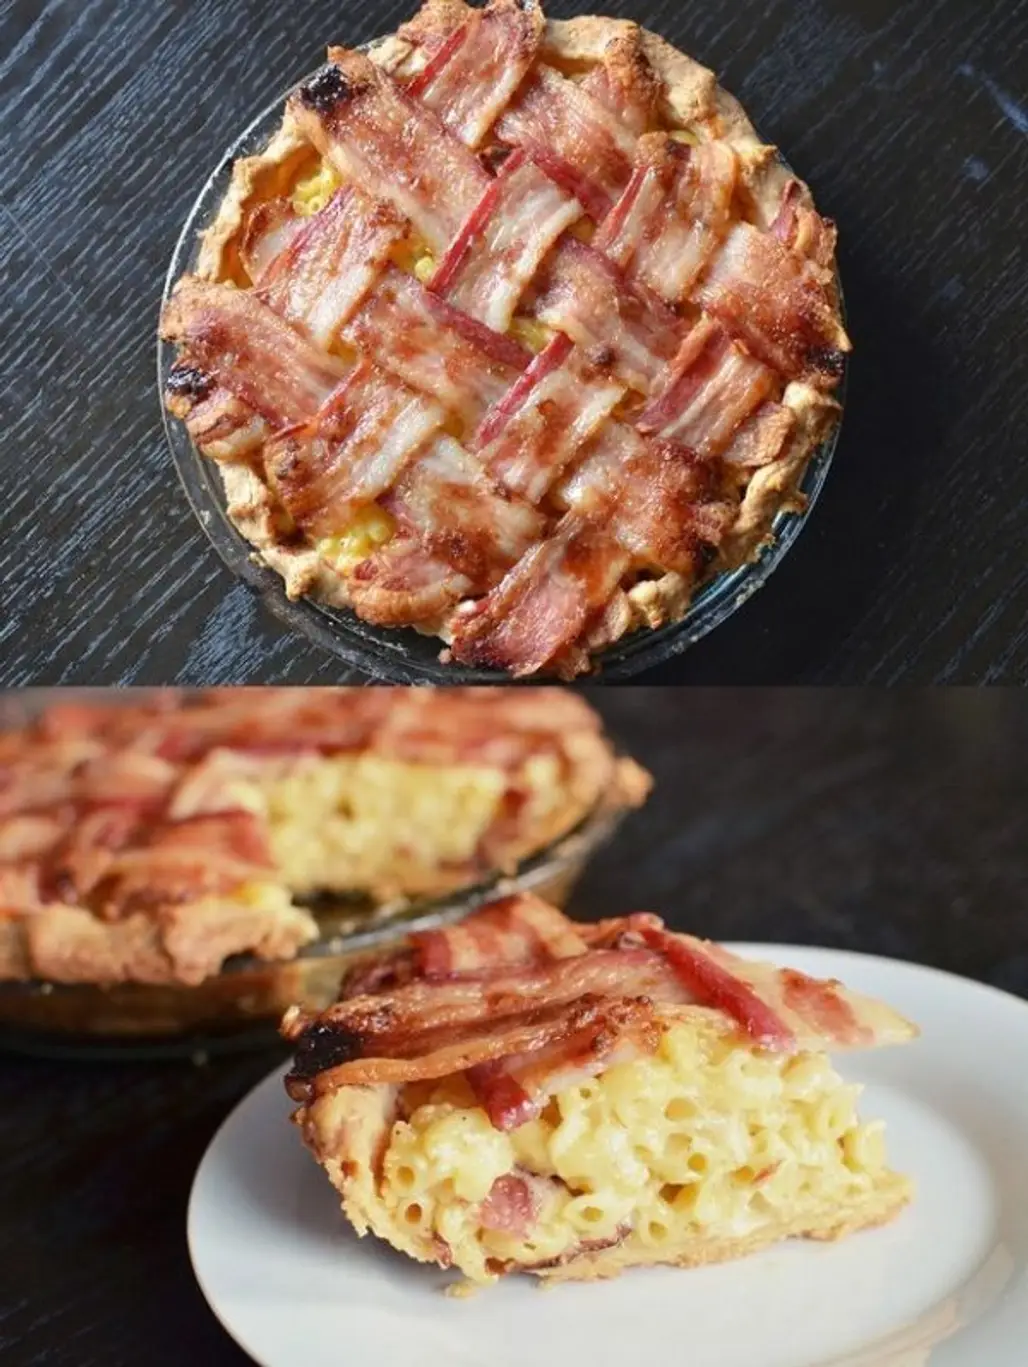 Topped with Bacon